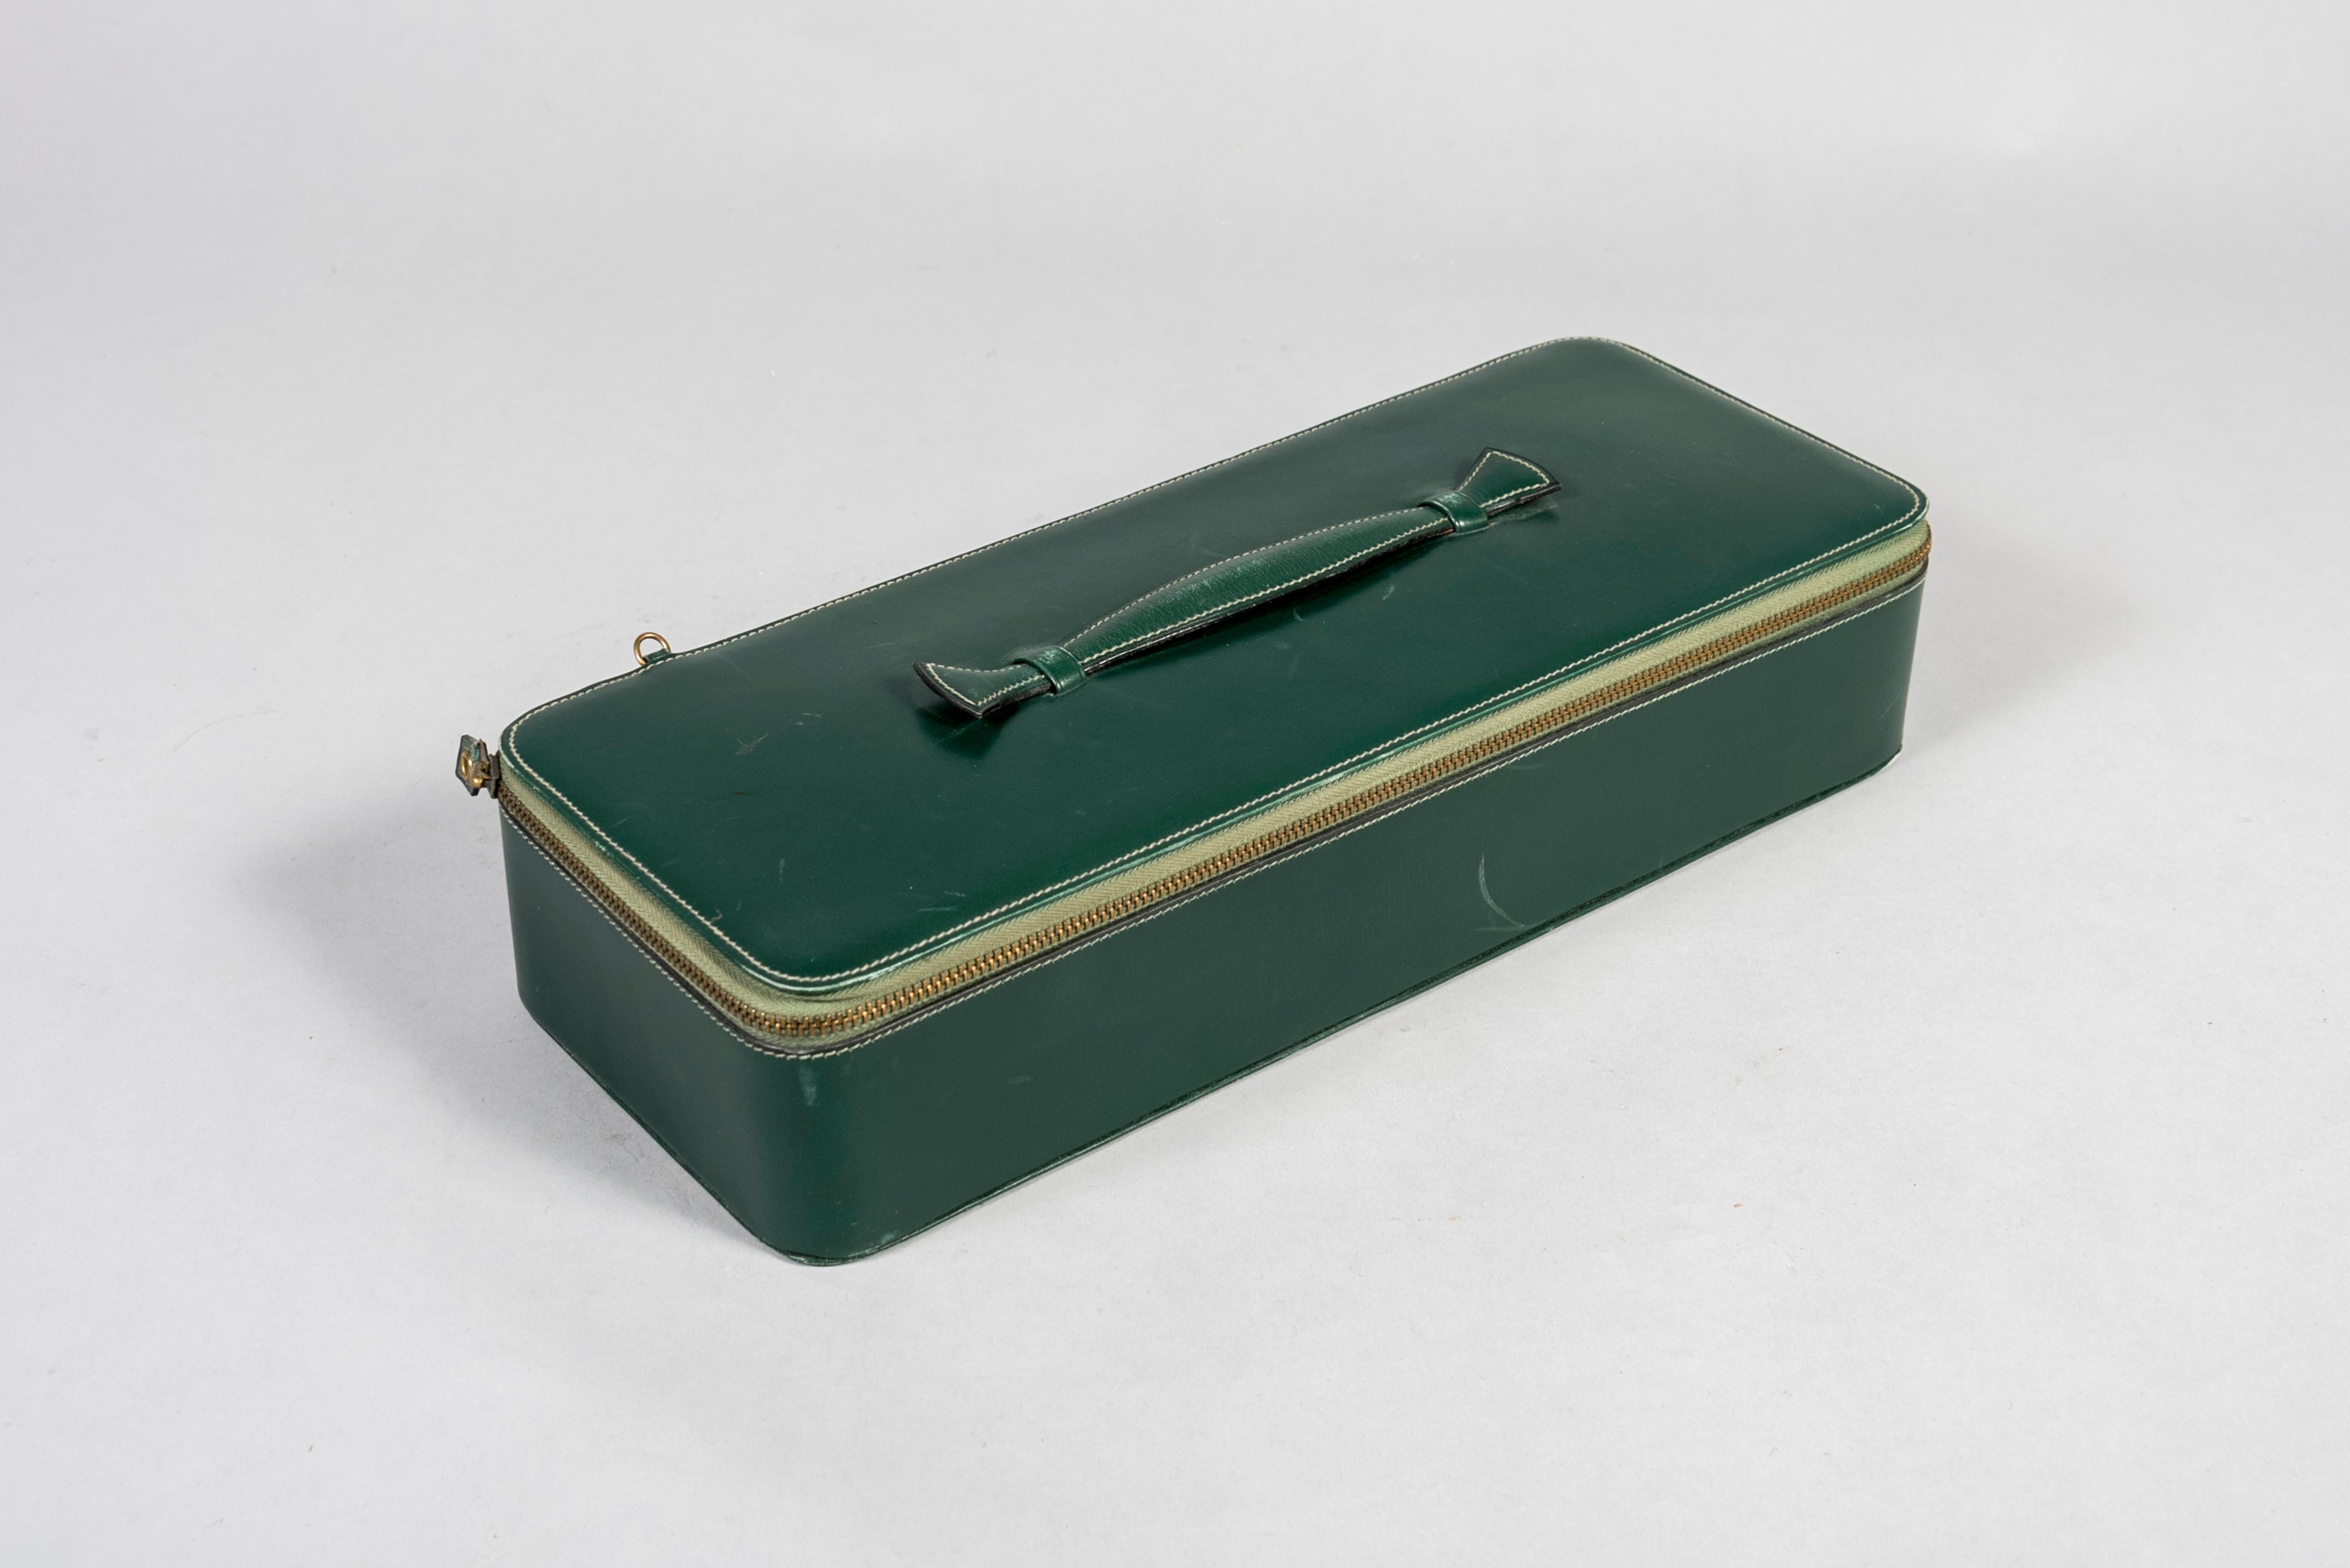 Rare boxe in green leather designed by Maison Hermes
Circa 1970's.